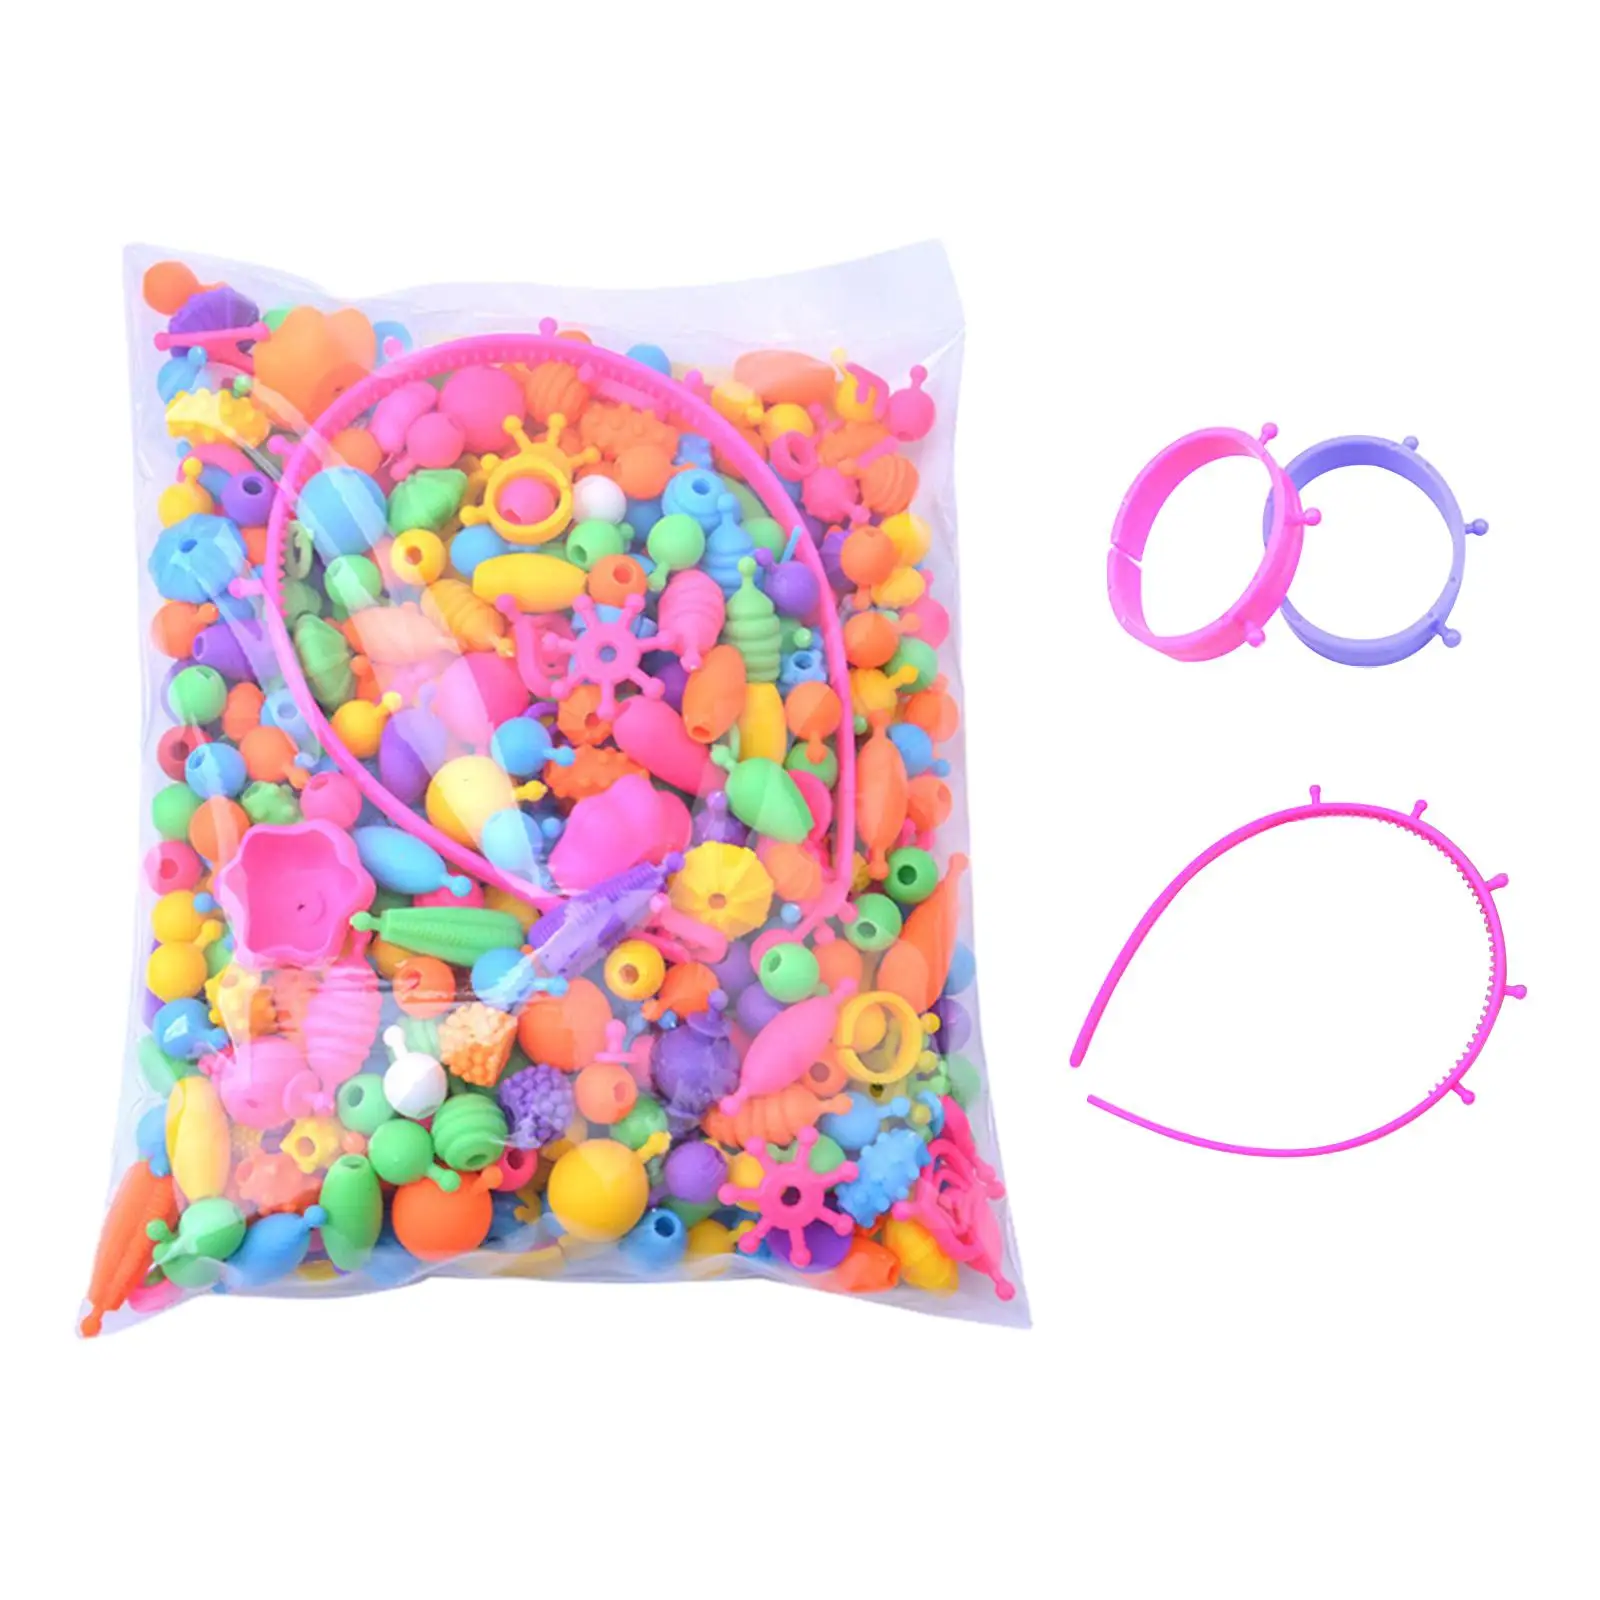 Beads for Kids DIY Jewelry Making Kit Crafts Supplies Snap Together Beads for Necklace Hairband Bracelet Girls Birthday Gift